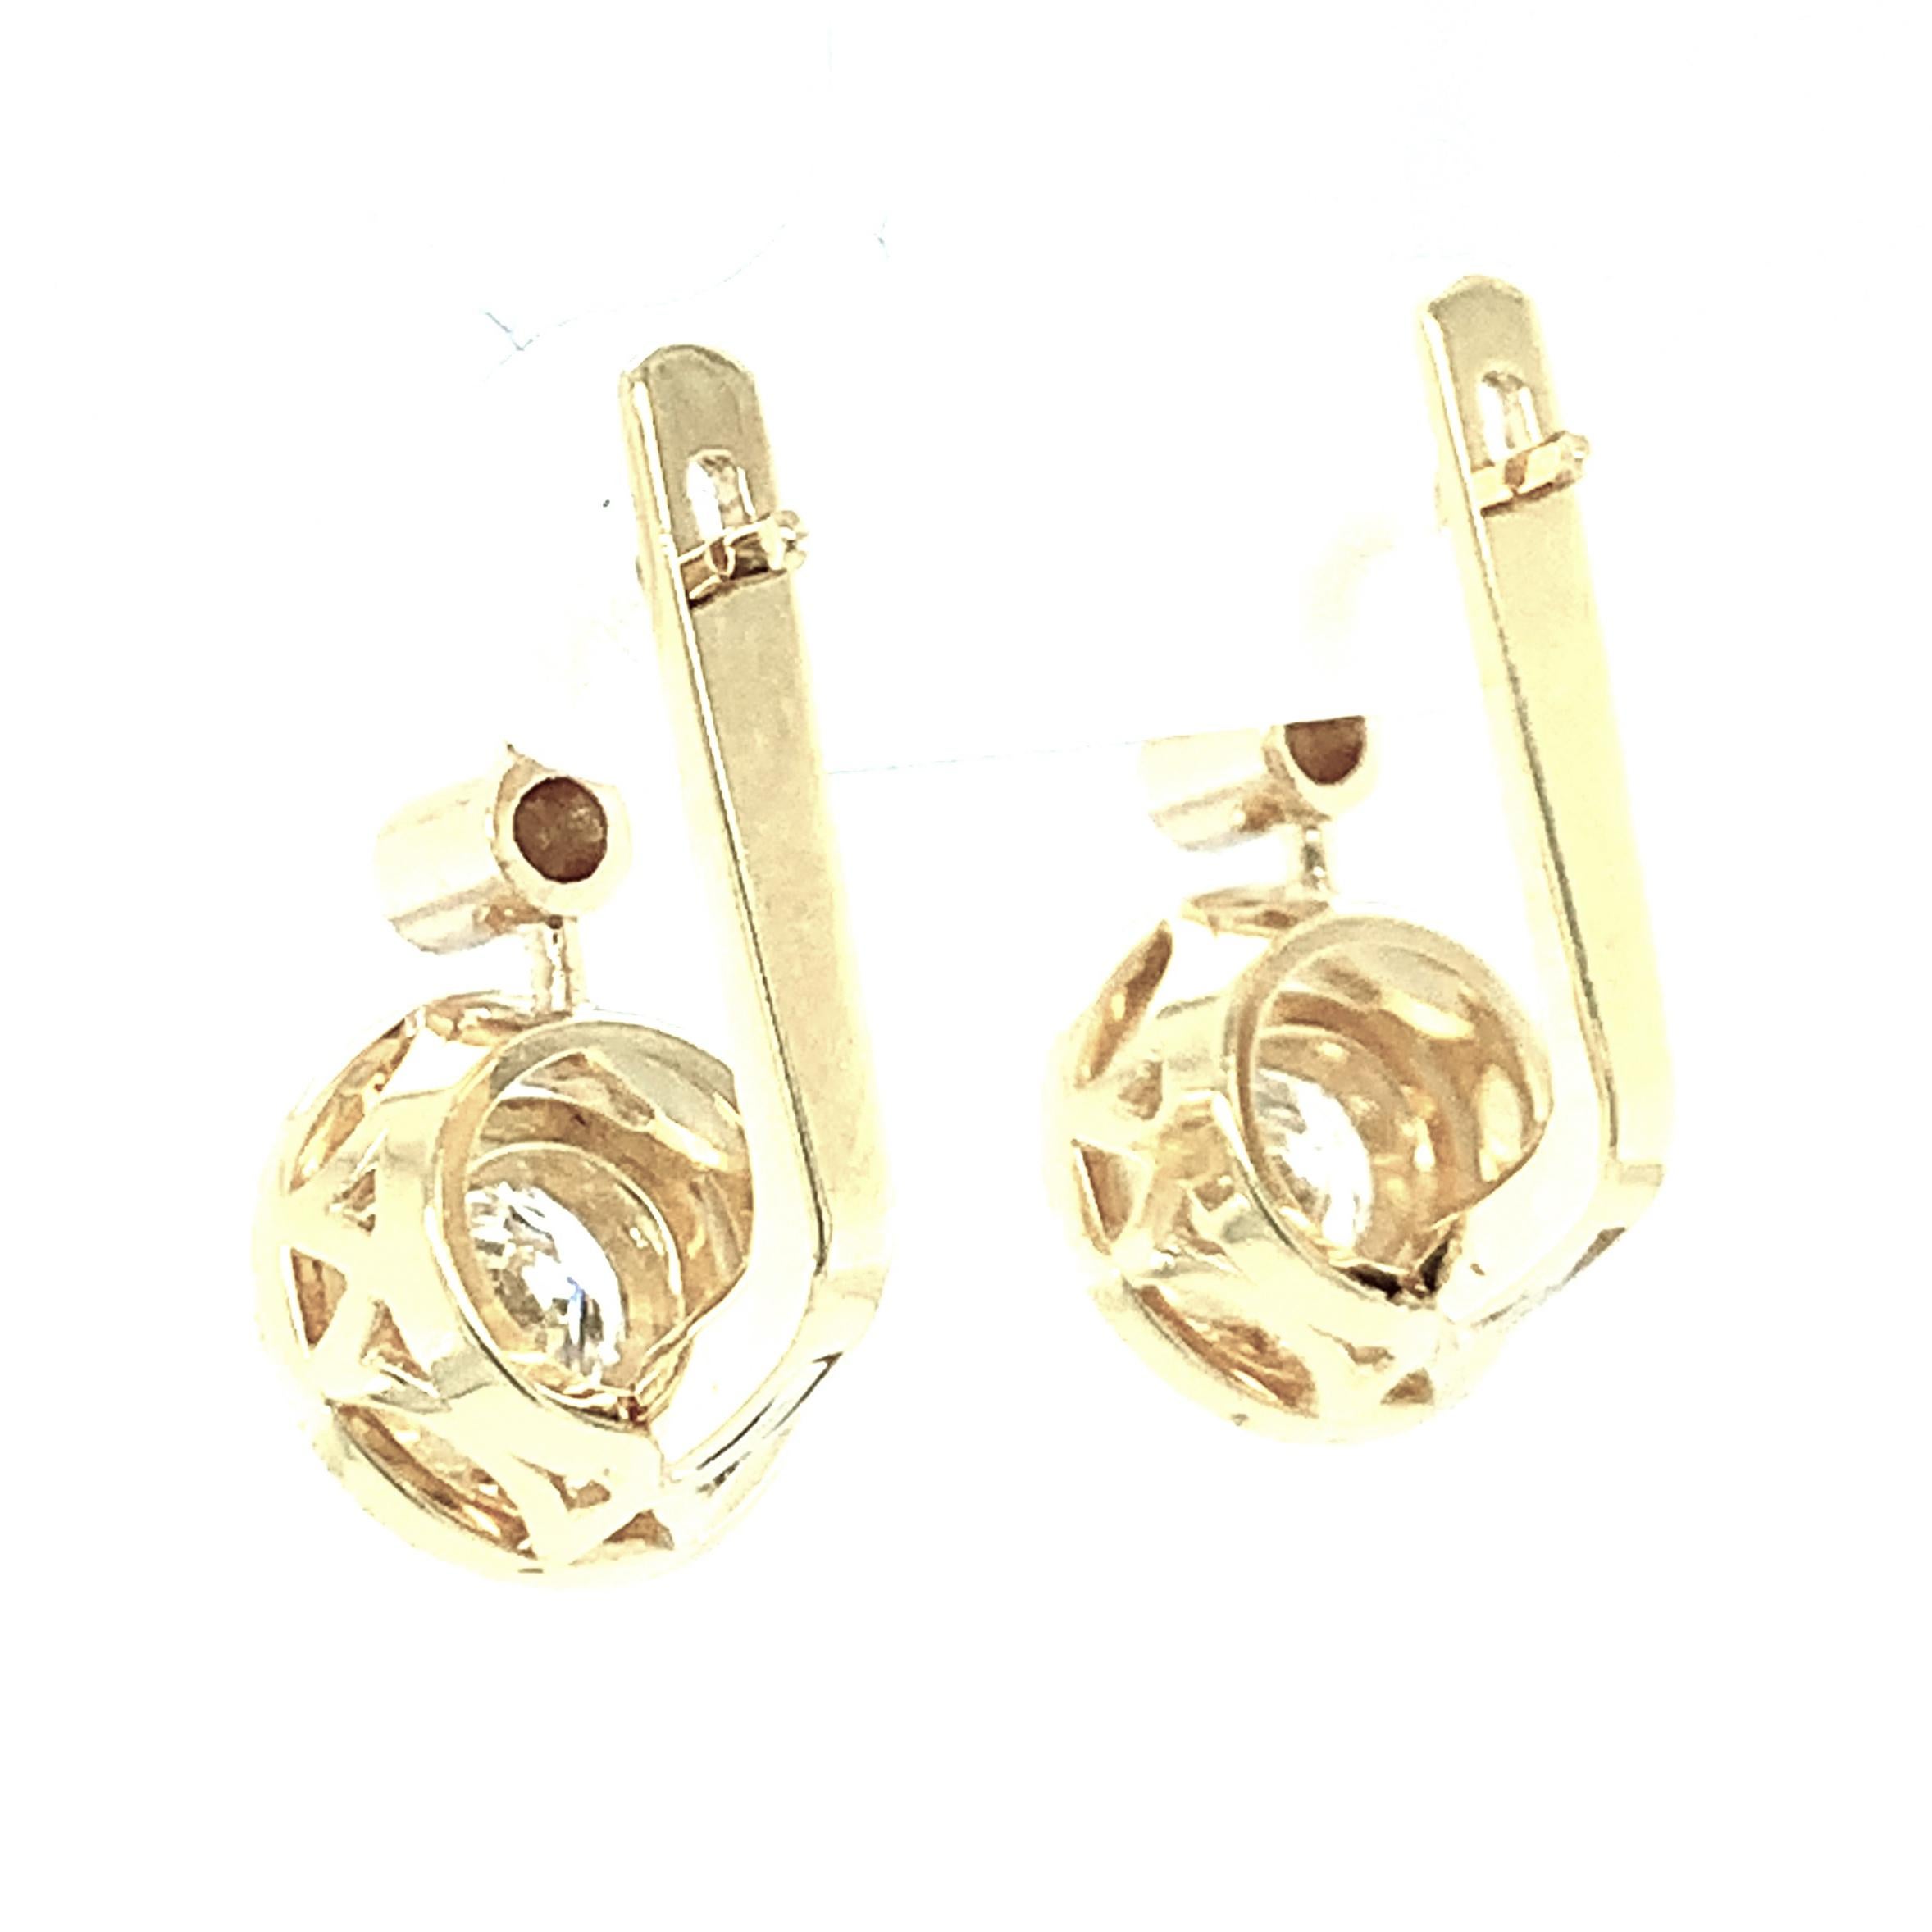 Artisan Hand Engraved Diamond Drop Earrings in Yellow Gold, 1.00 Carat Total For Sale